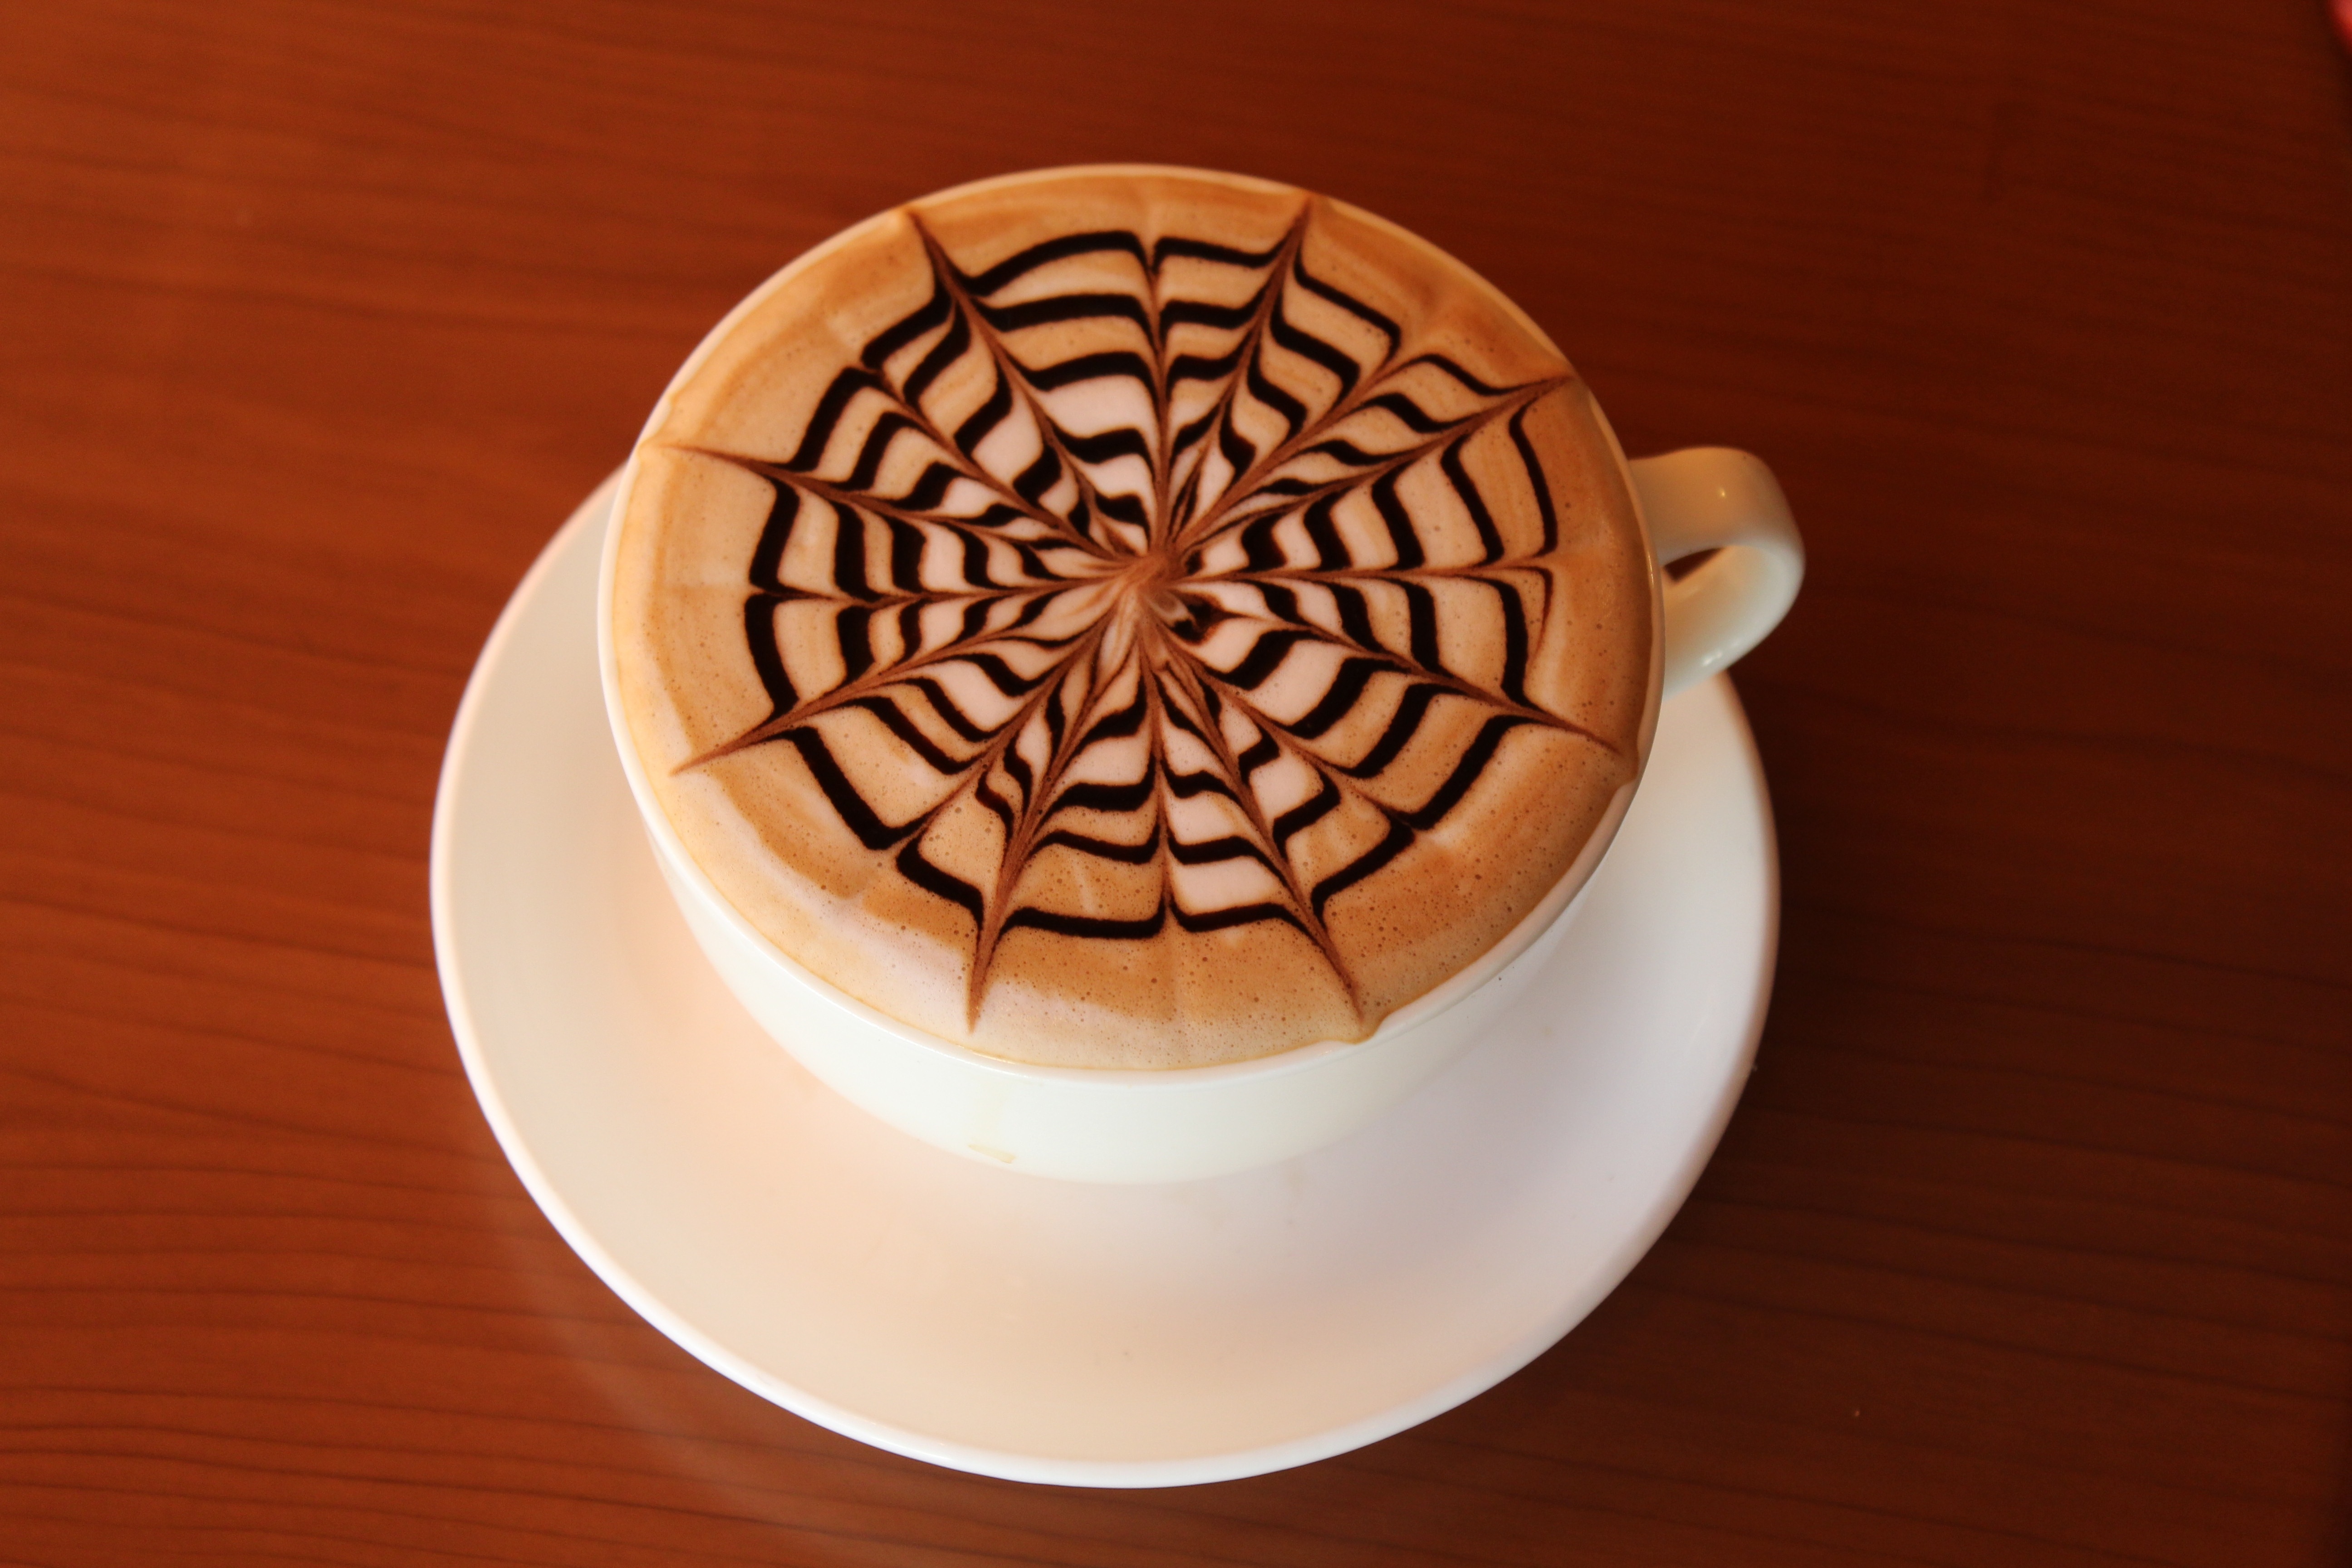 cappuccino cup